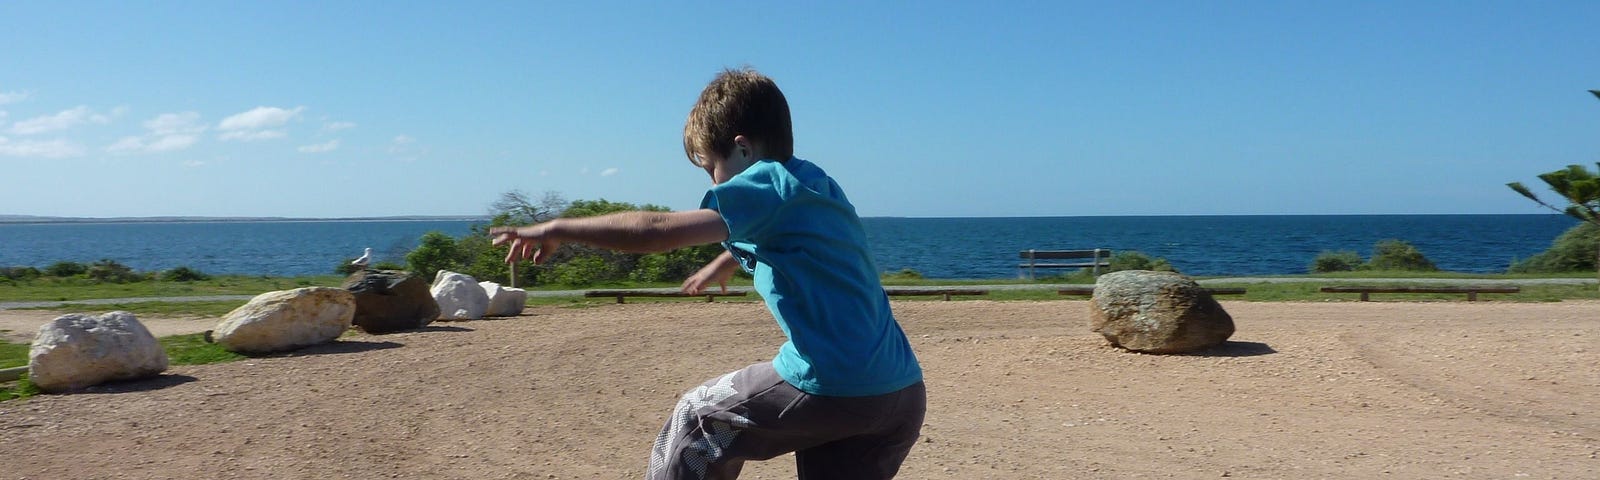 A young boy jumping from one large rock to another with the ocean background behind him